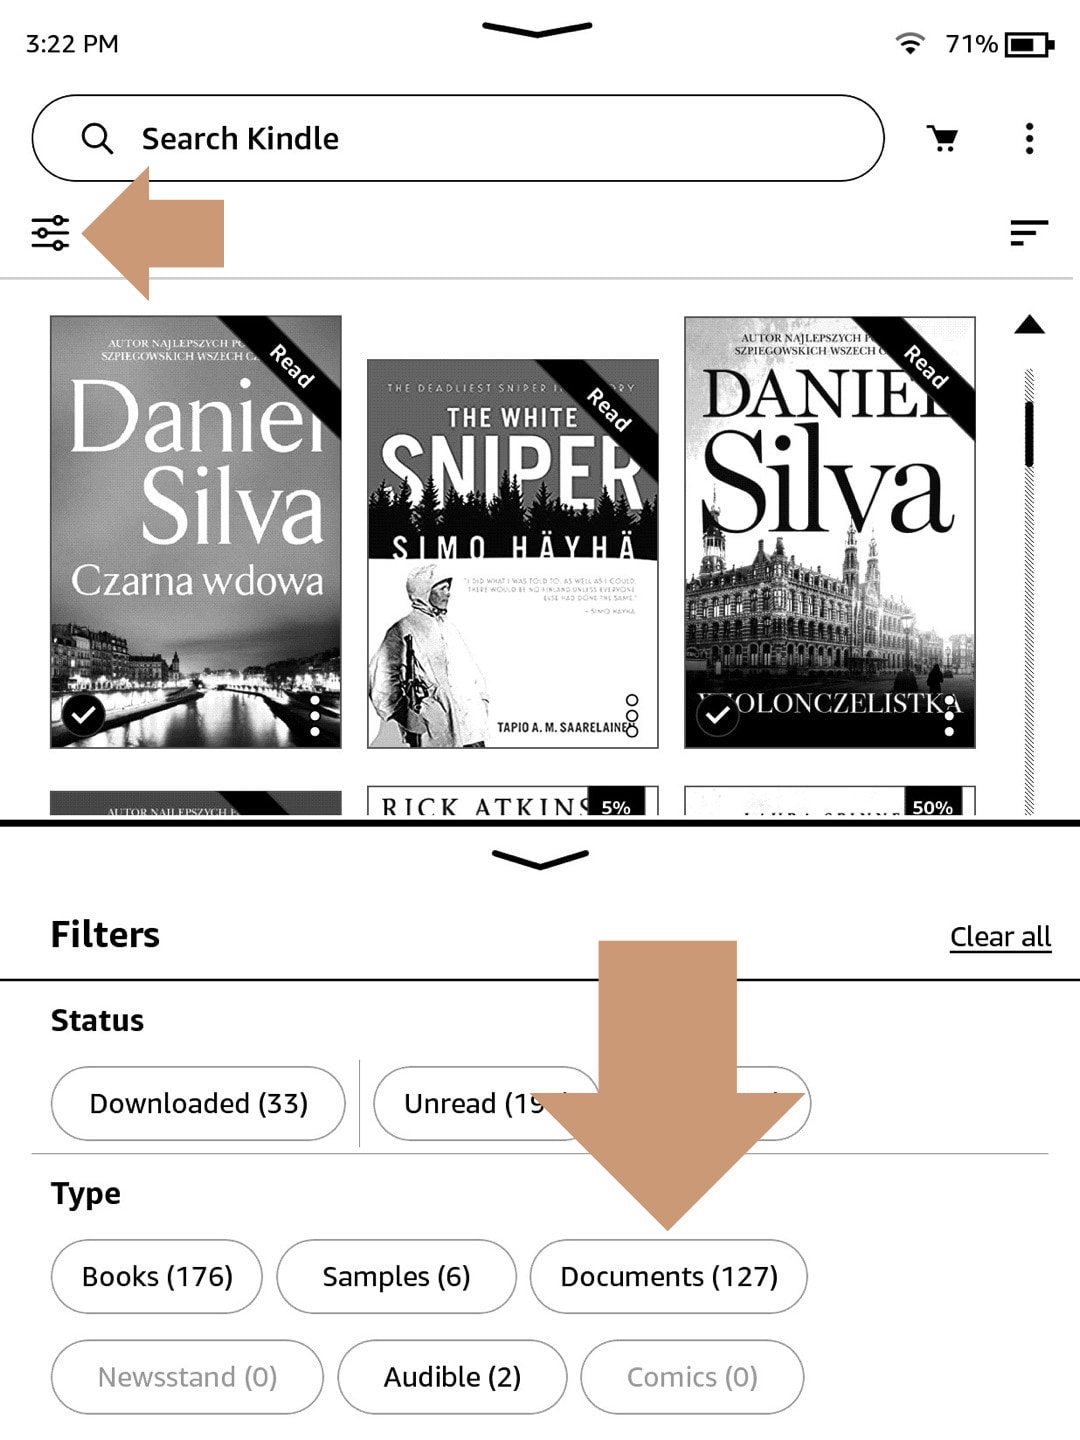 Your own books are called Documents on Kindle